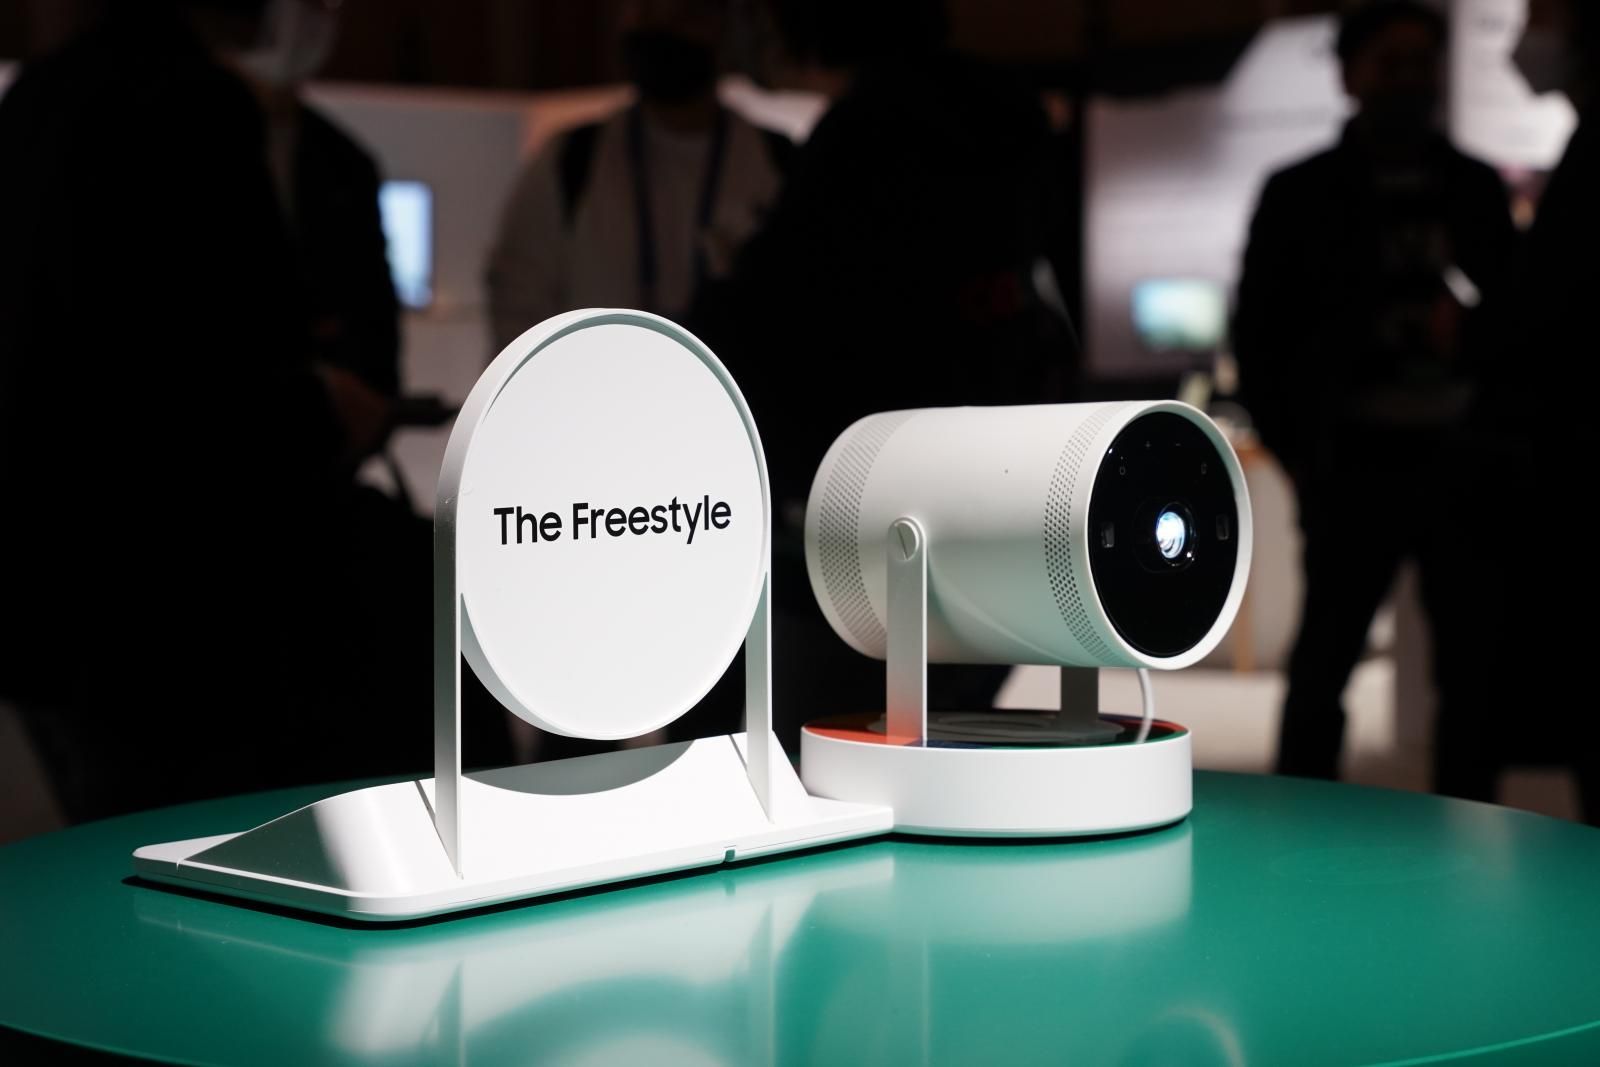 Samsung Freestyle Projector front view